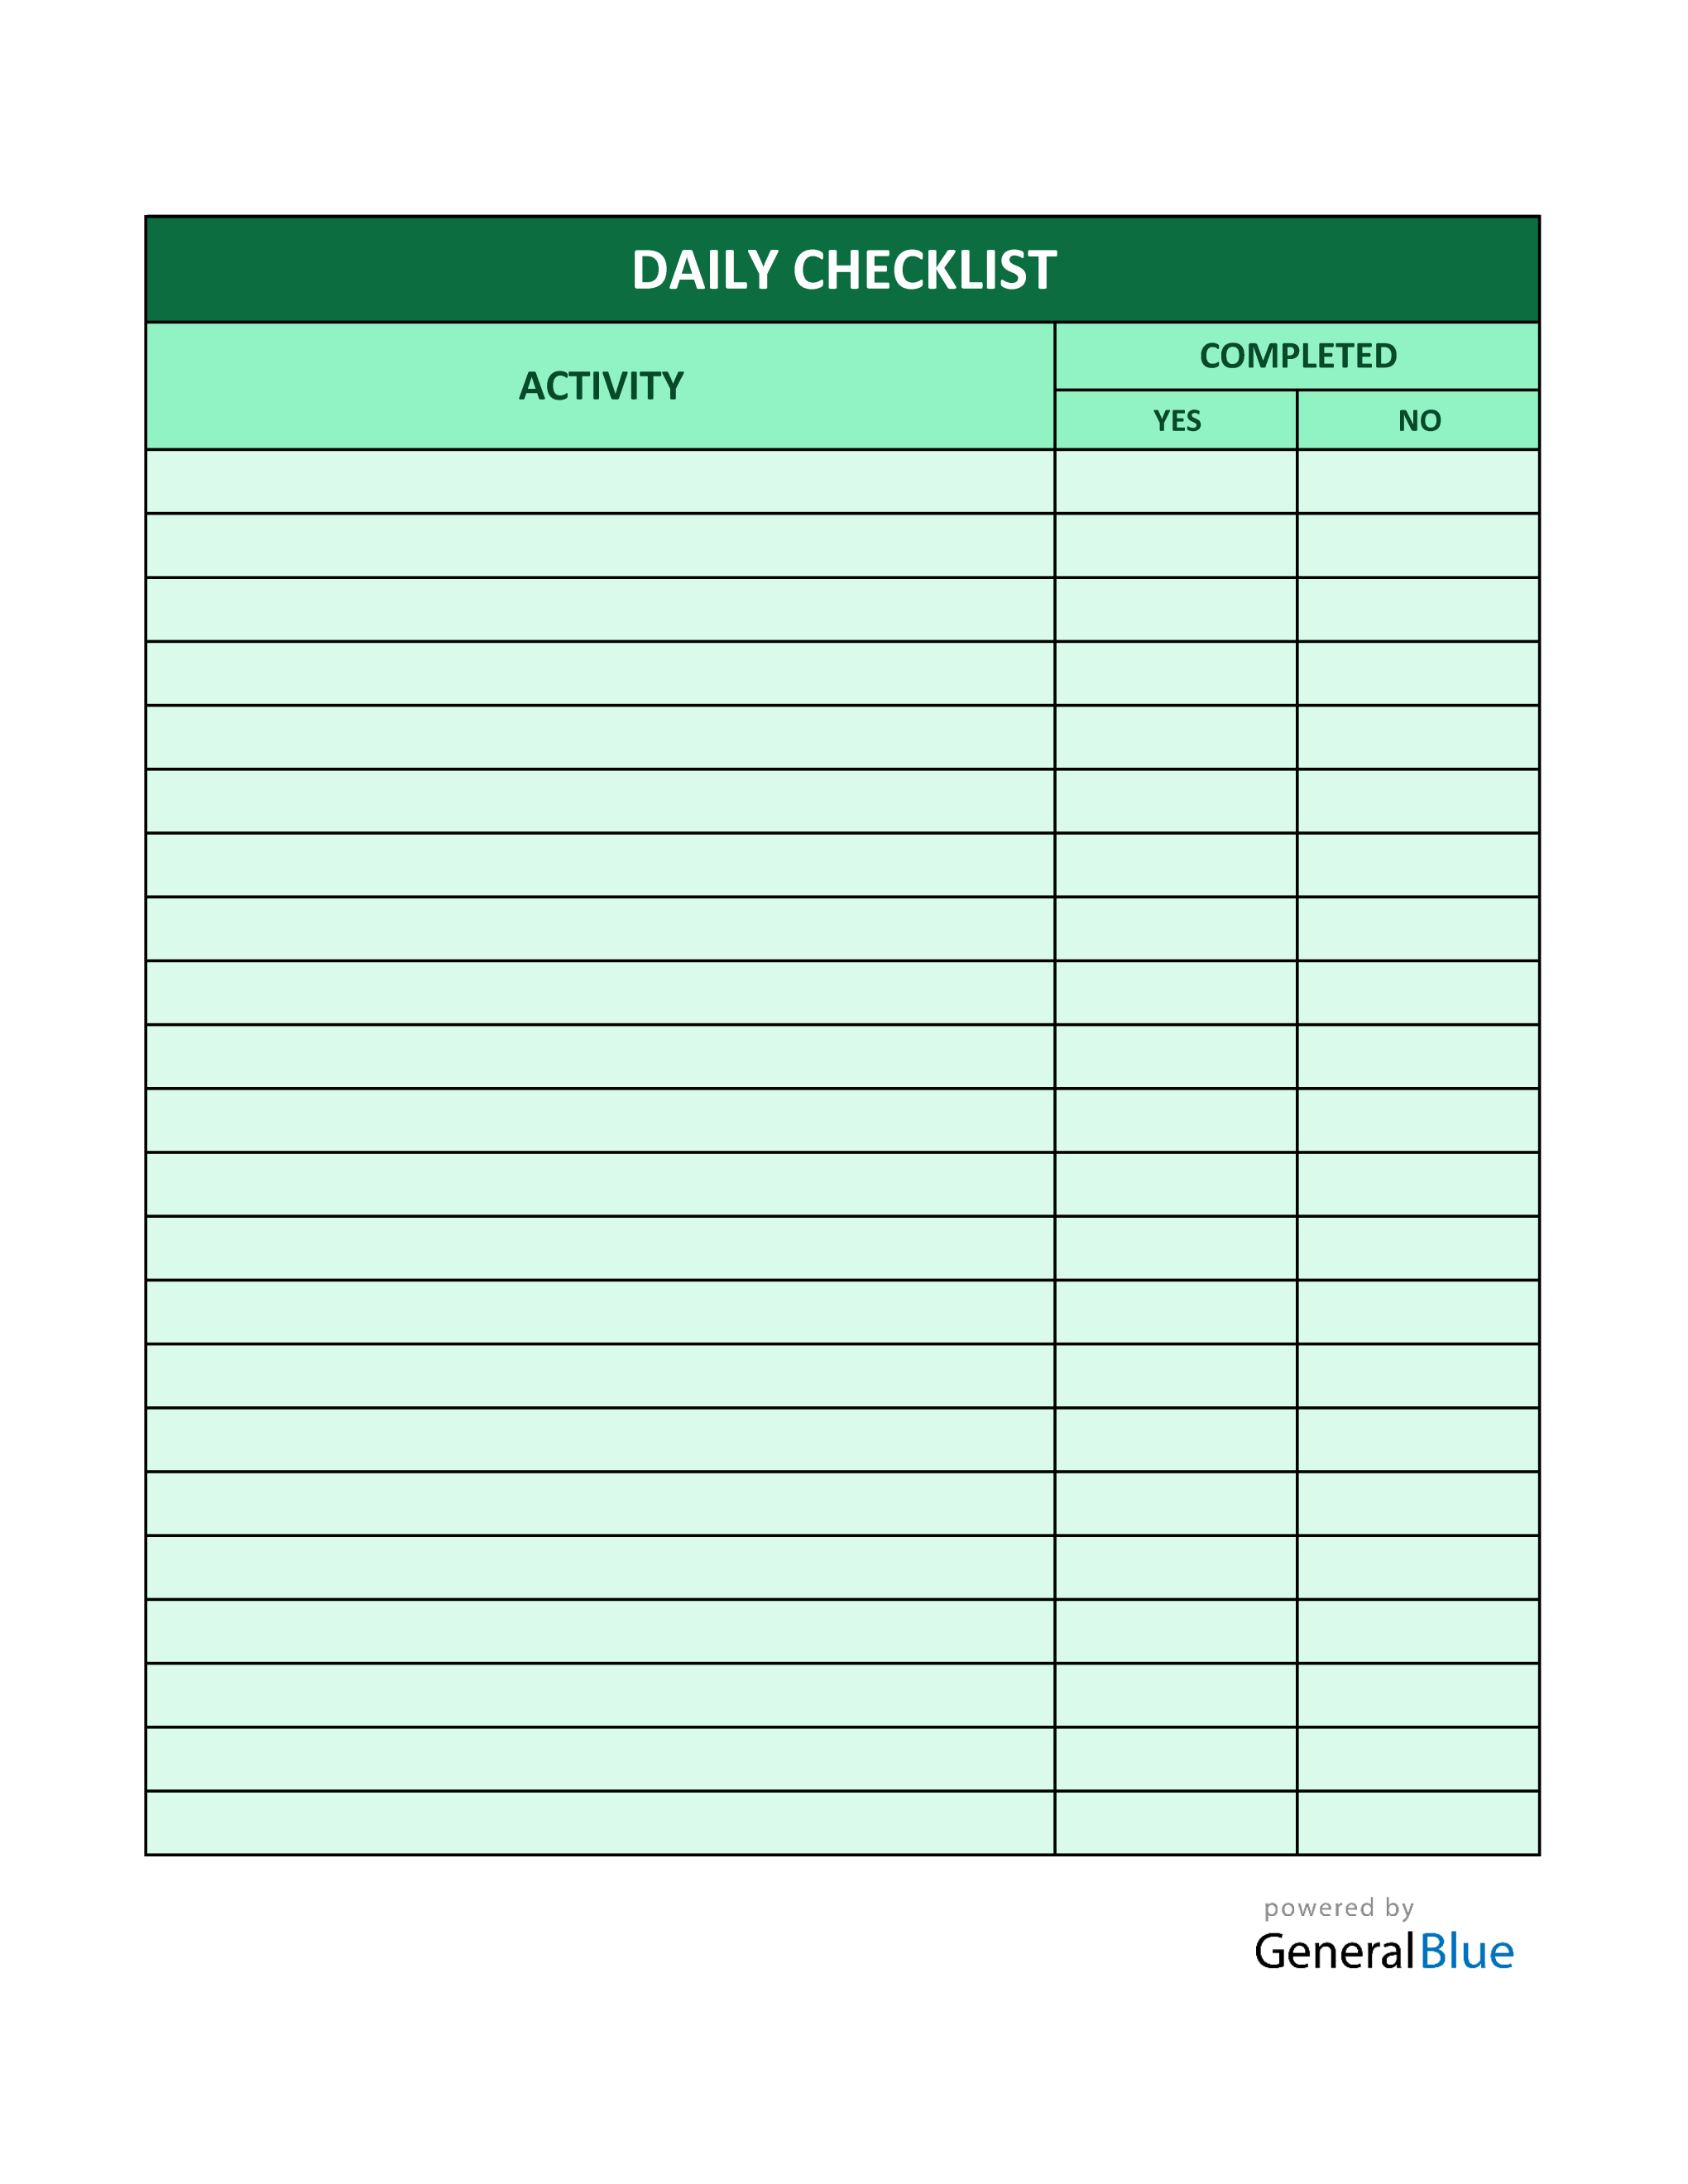 Daily Checklist Template in Excel Intended For Weekly Checklist Template Excel Within Weekly Checklist Template Excel